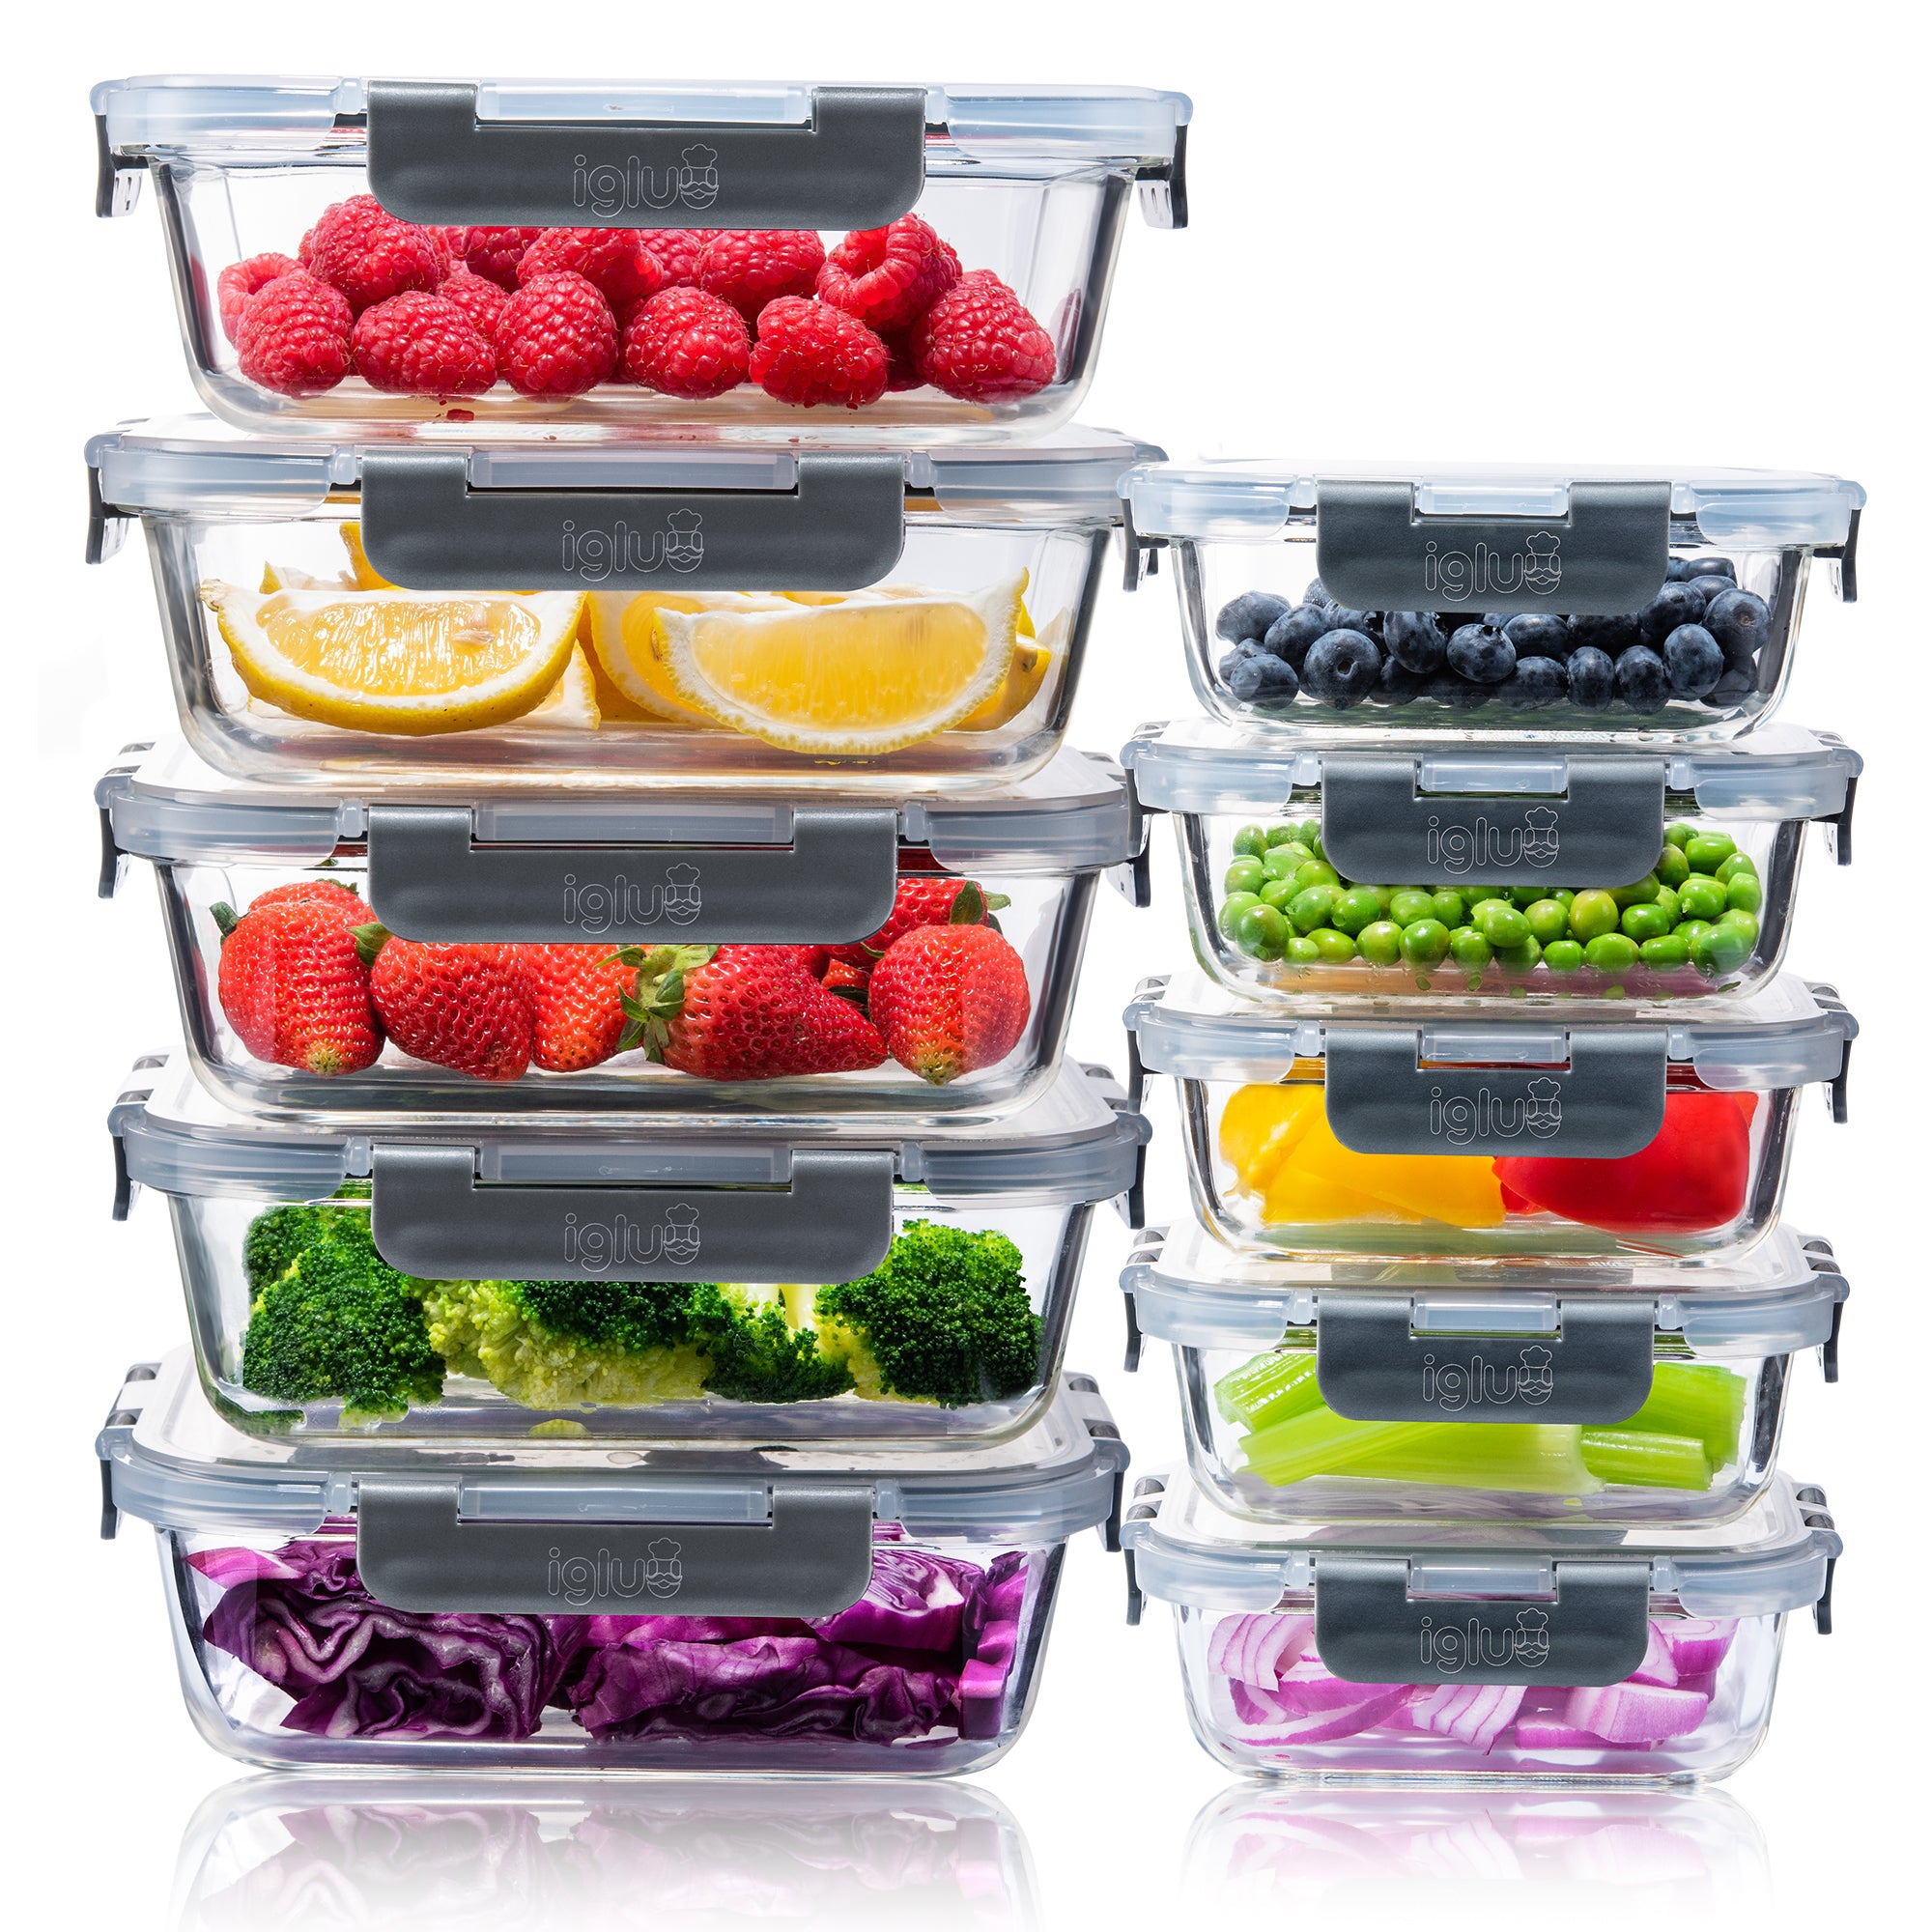 10 Pack] Glass Meal Prep Containers, Food Storage Containers with